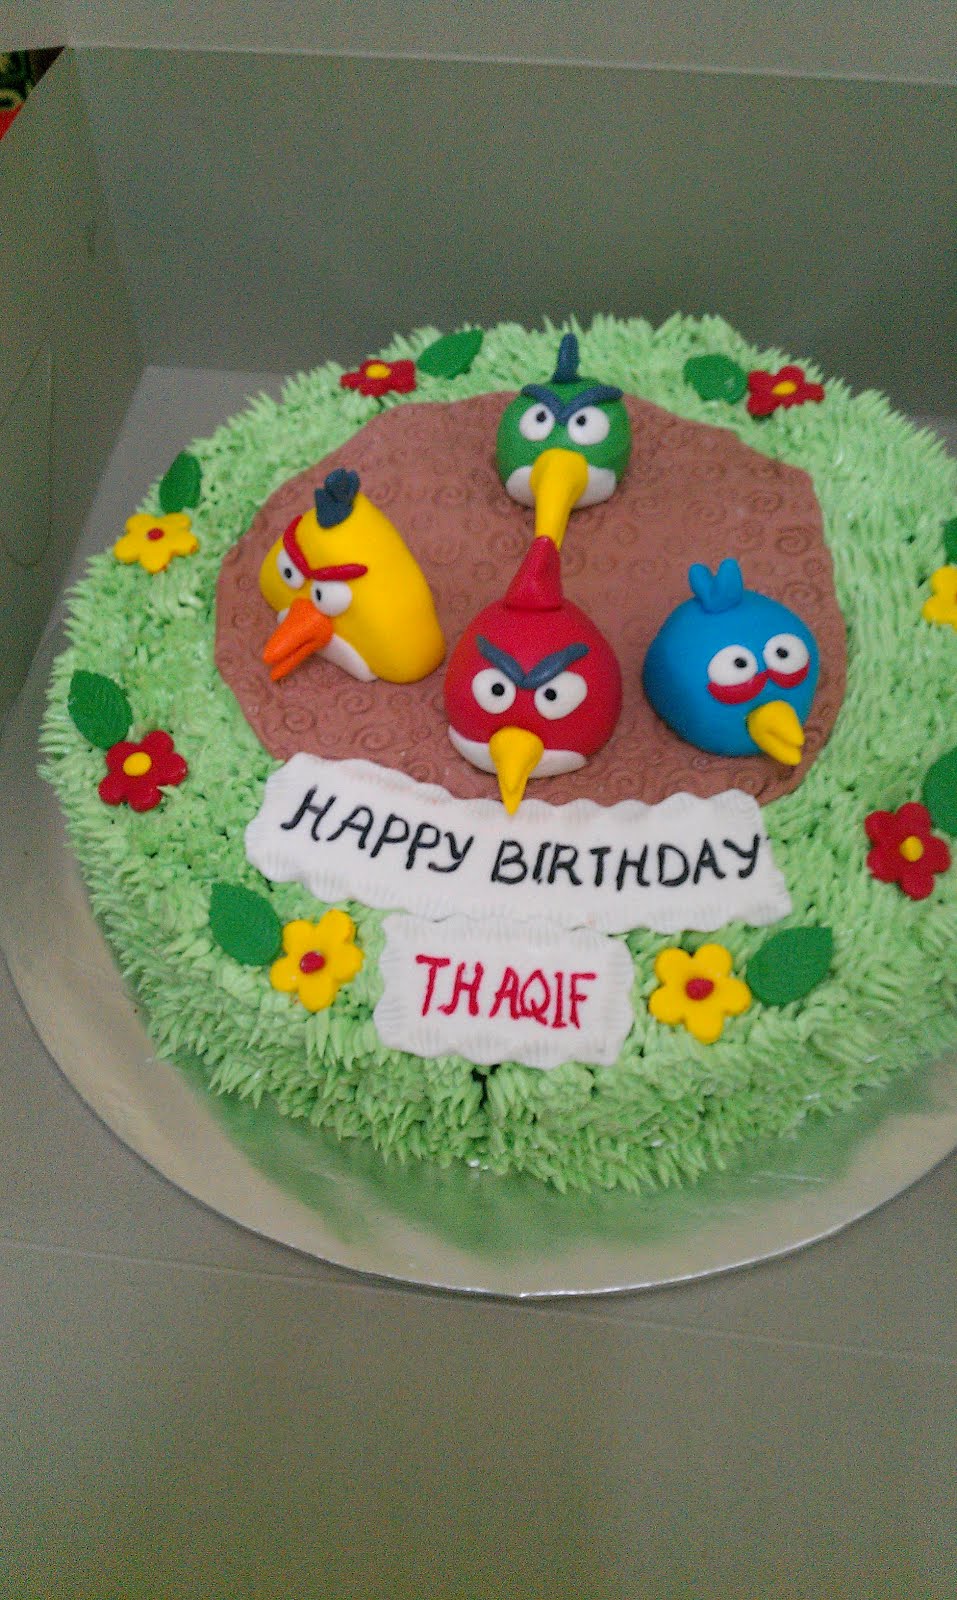 3D Angry Birds Cake